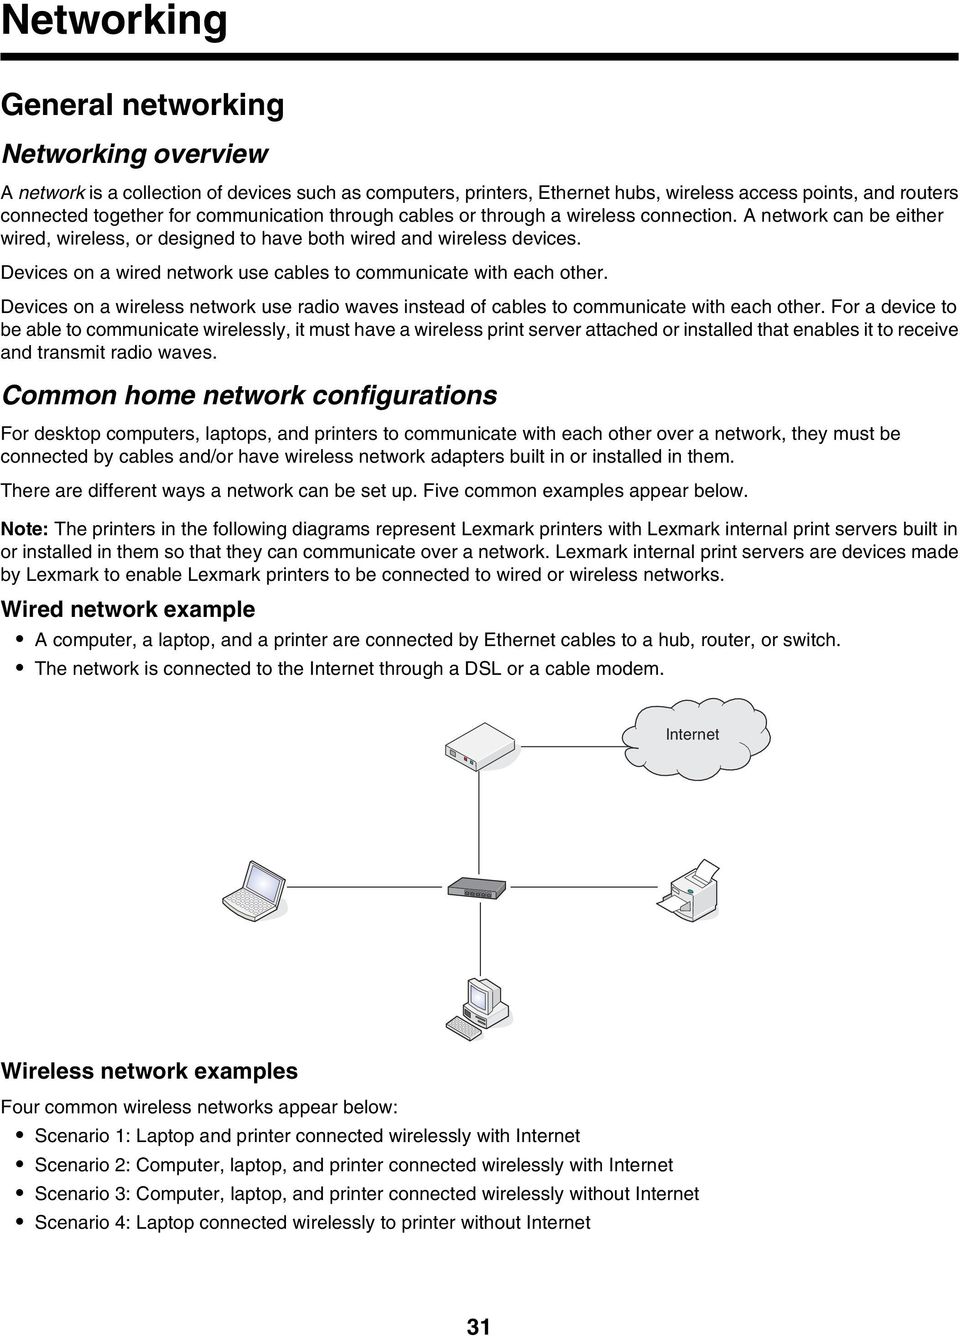 Devices on a wired network use cables to communicate with each other. Devices on a wireless network use radio waves instead of cables to communicate with each other.